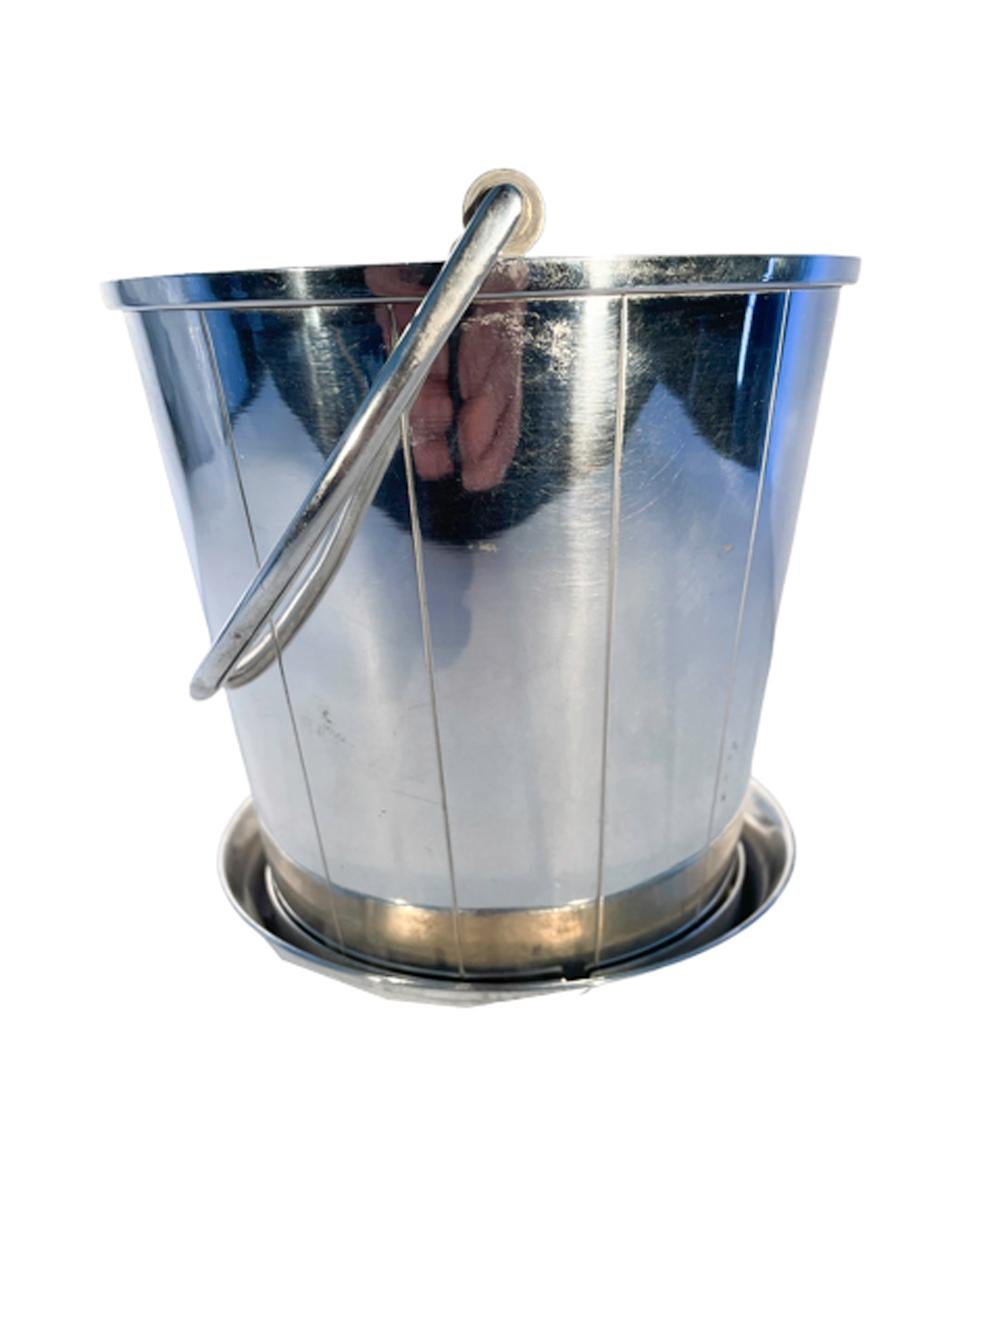 Unusual Art Deco Silver Plate Ice Bucket W/Ice Drain & Detachable Saucer In Good Condition For Sale In Nantucket, MA